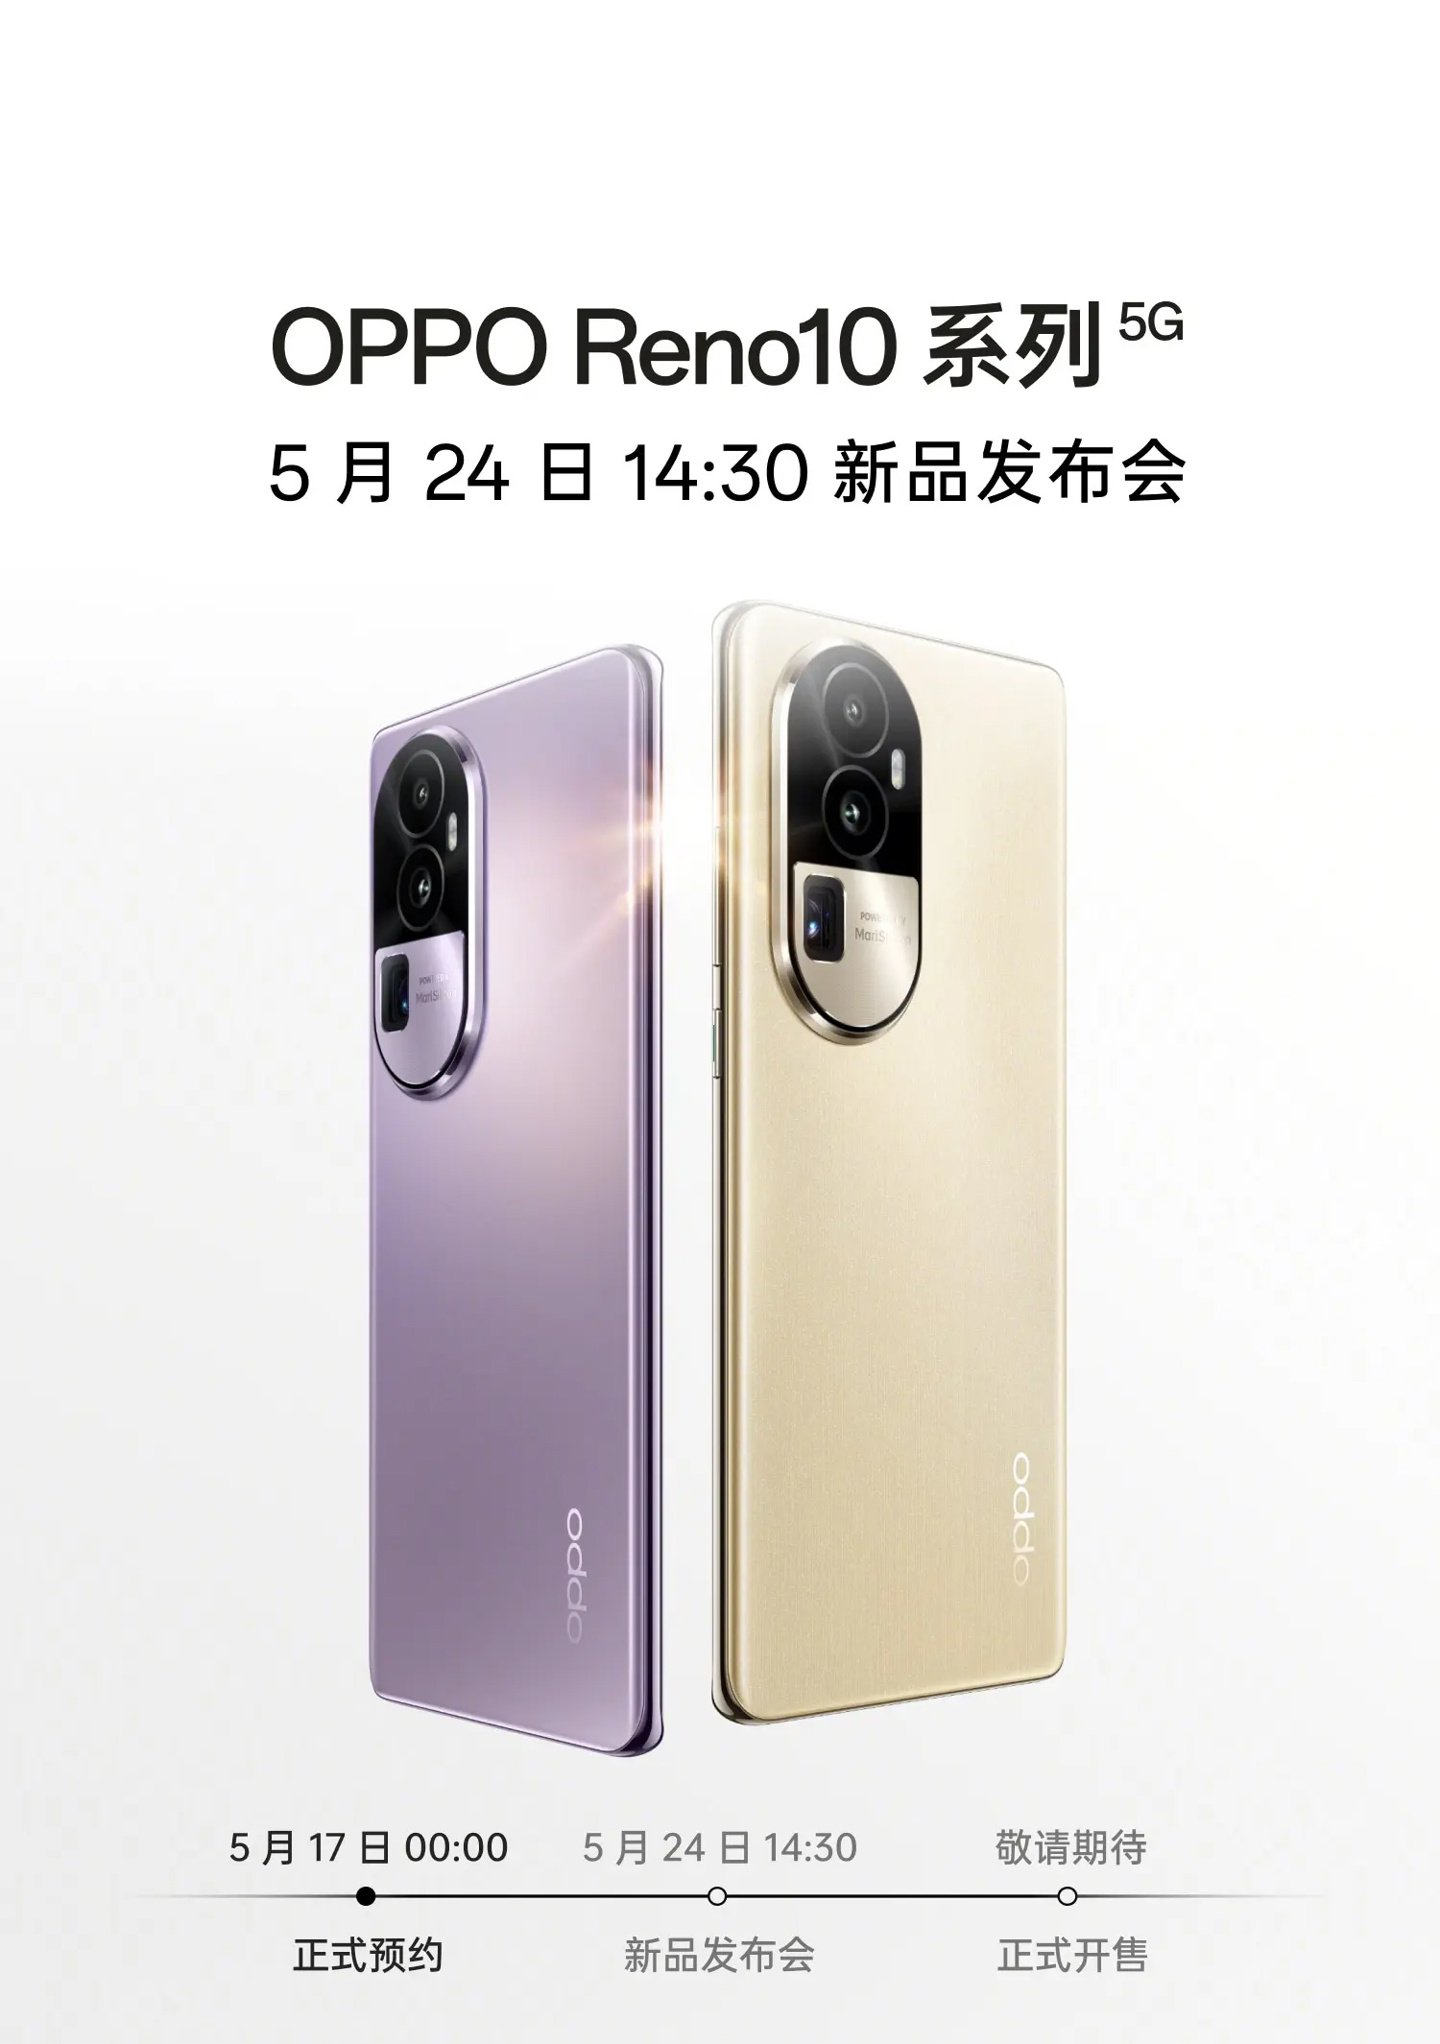 Oppo Reno 10 series to launch today at noon: Expected price and features